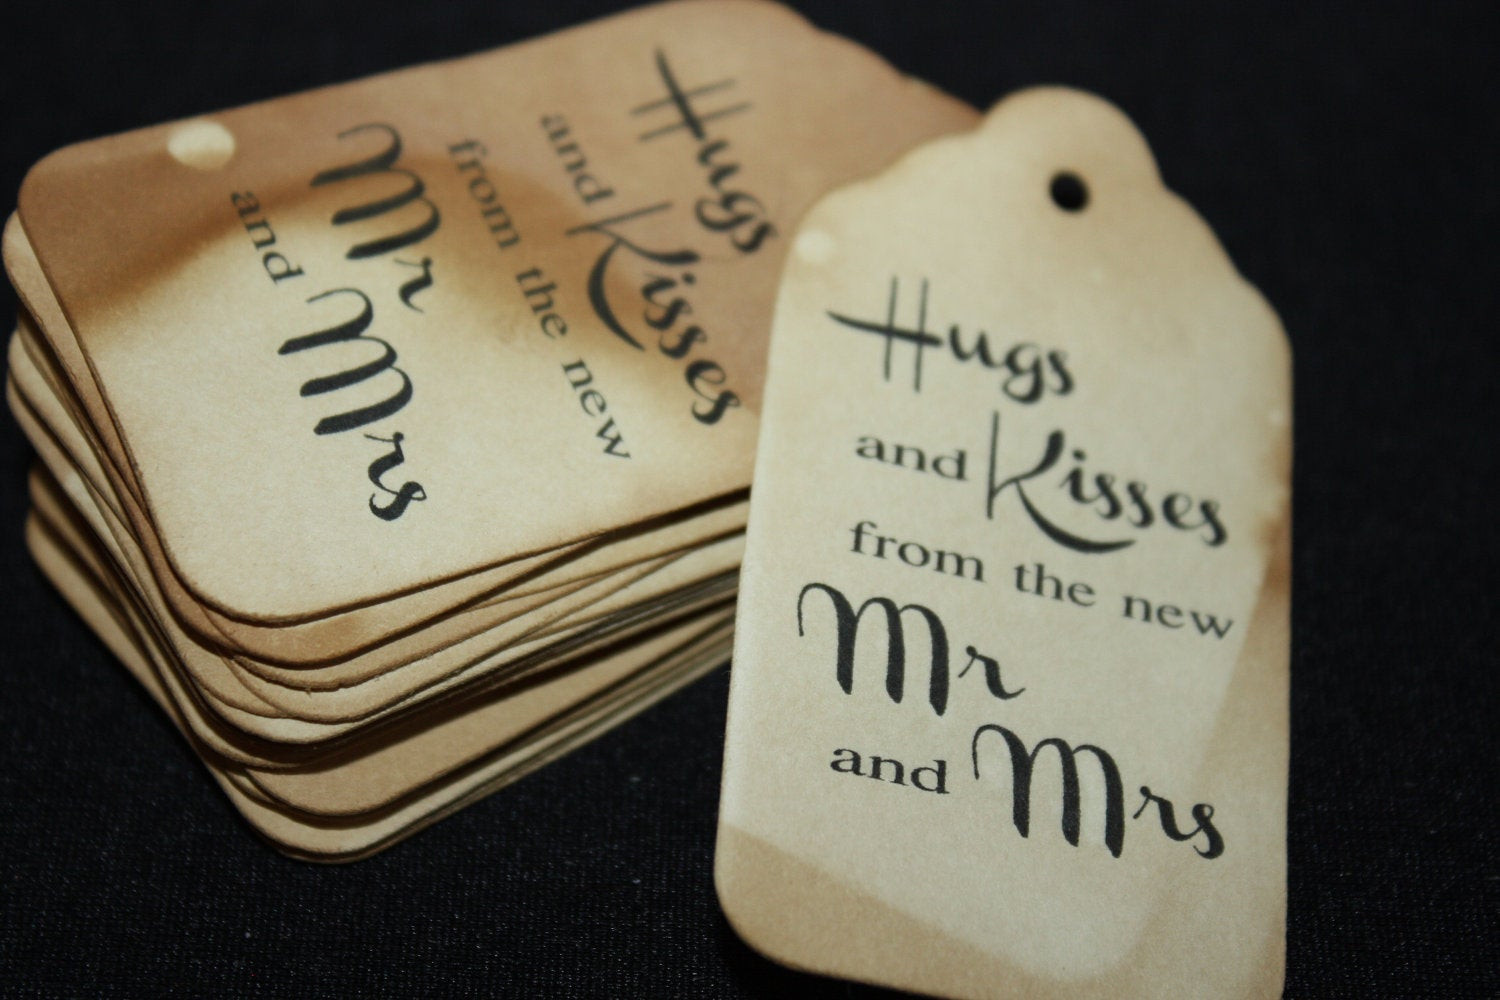 Wedding Tags For Favors
 100 Wedding Favor Tags Hugs and Kisses from the New Mr and Mrs